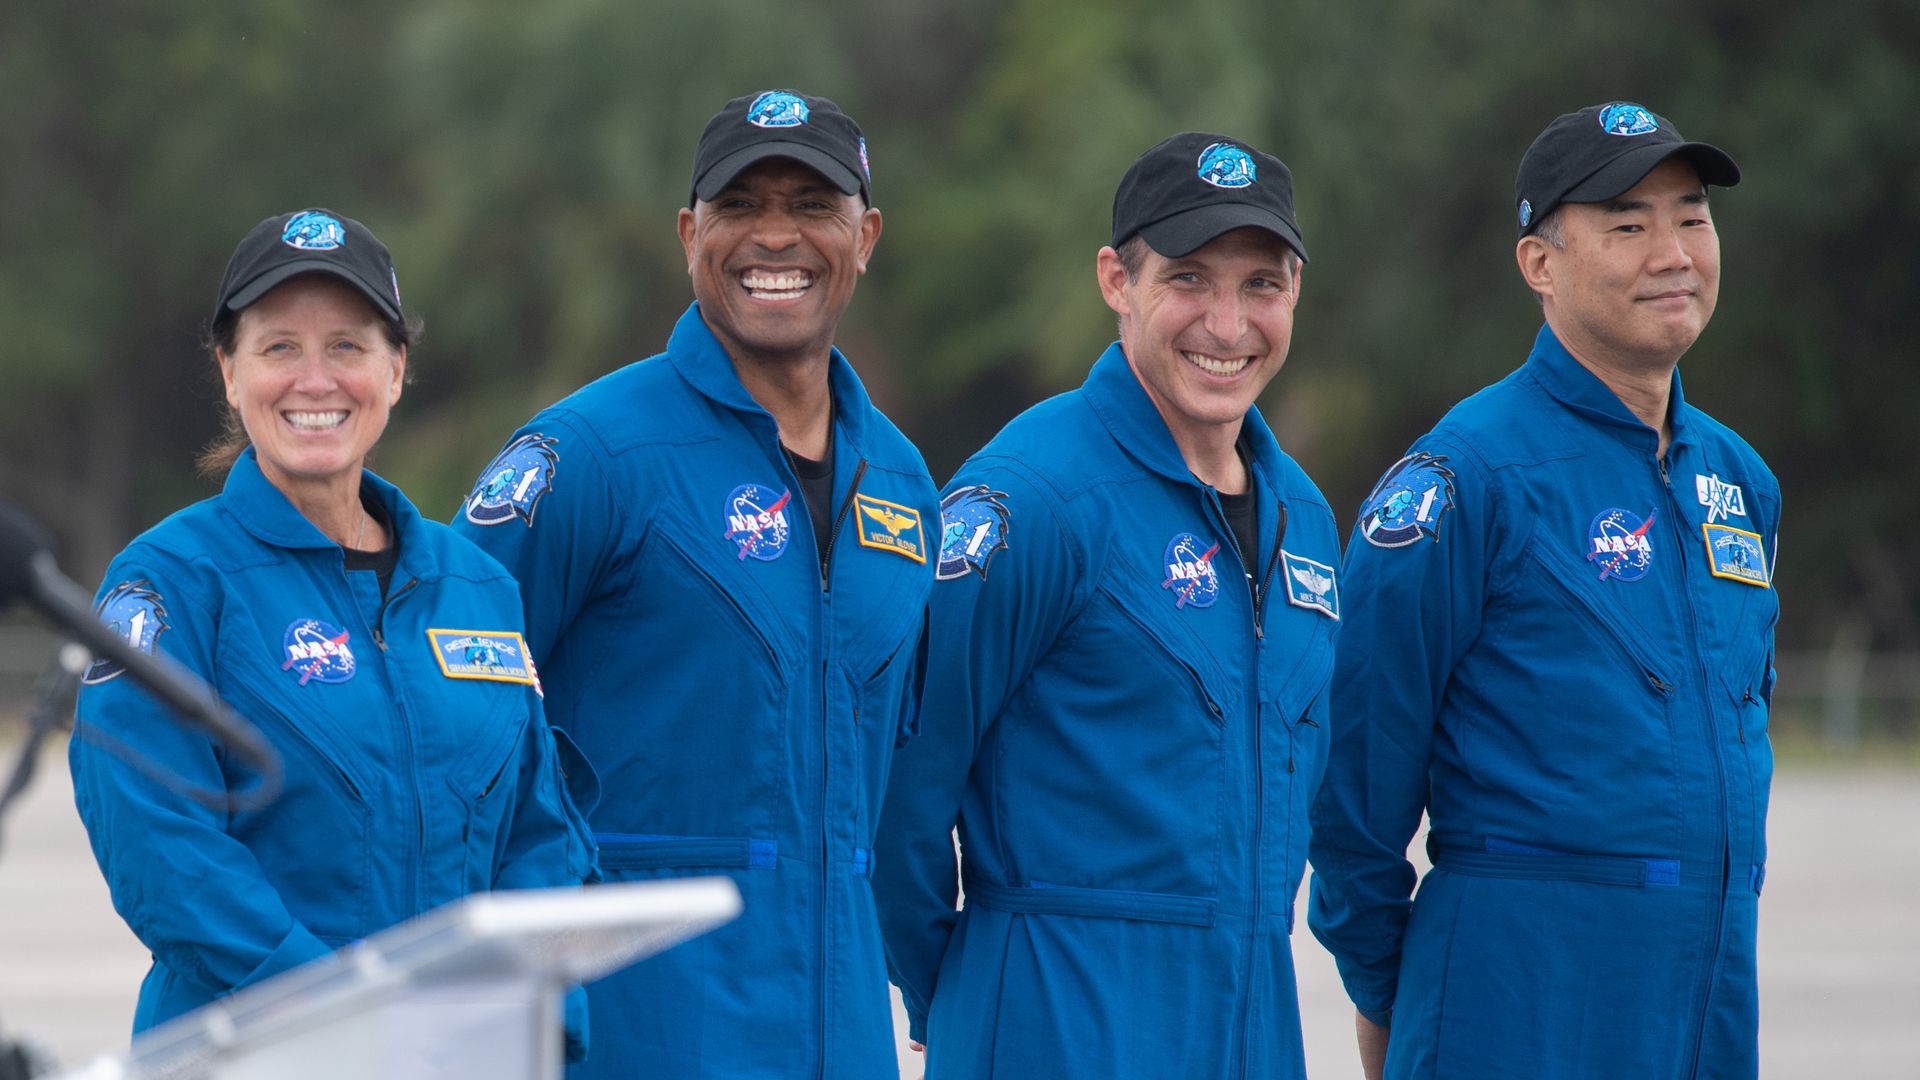 The four astronauts heading to space with SpaceX smiling in Florida